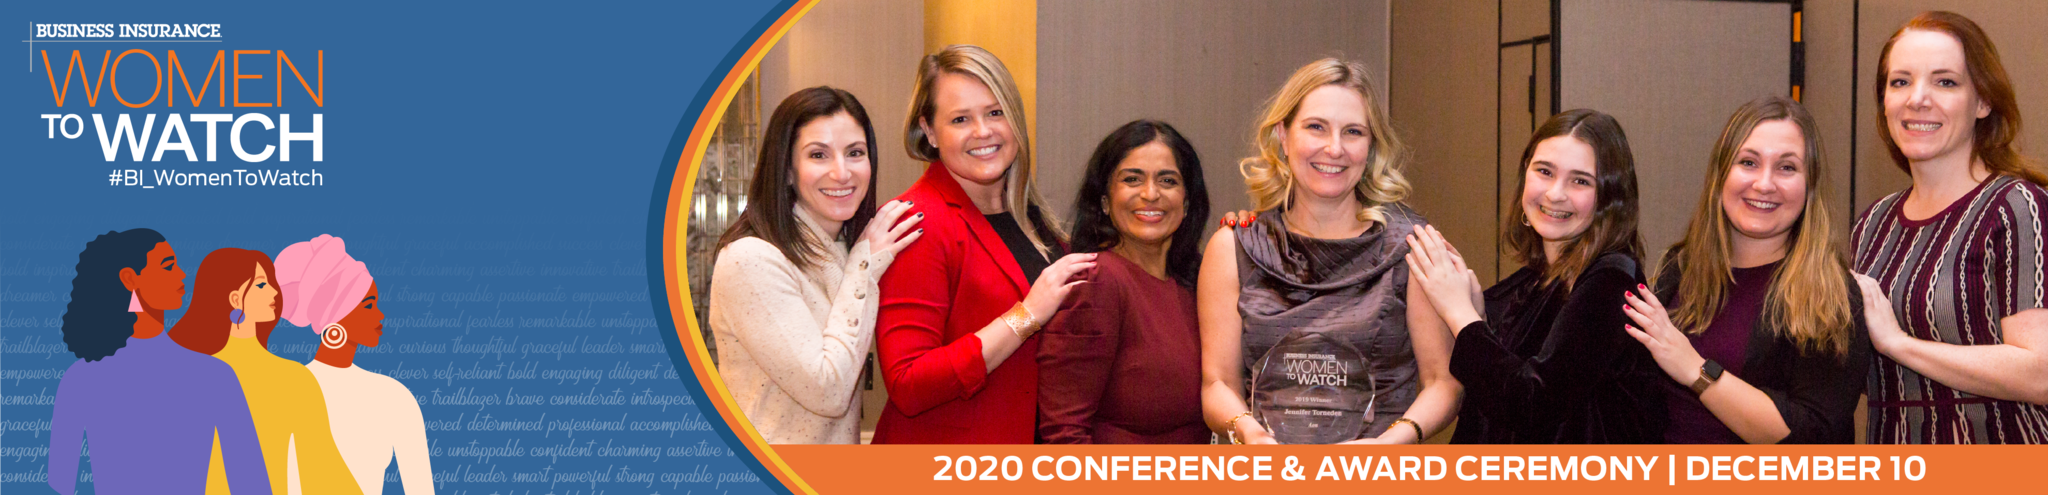 2020 WOMEN TO WATCH VIRTUAL AWARDS & LEADERSHIP CONFERENCE